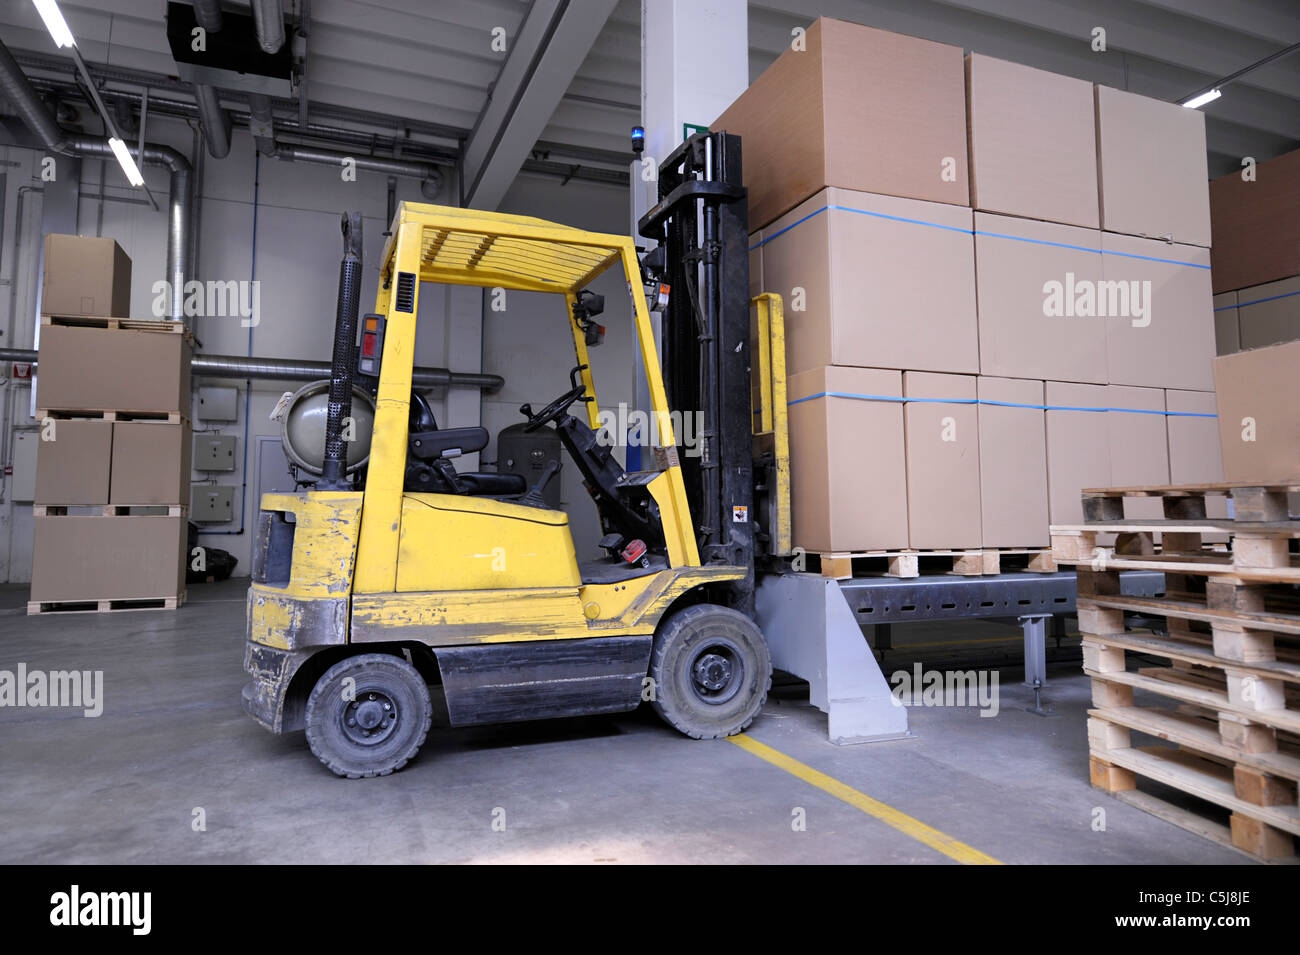 forklift with carton boxes in factory Stock Photo